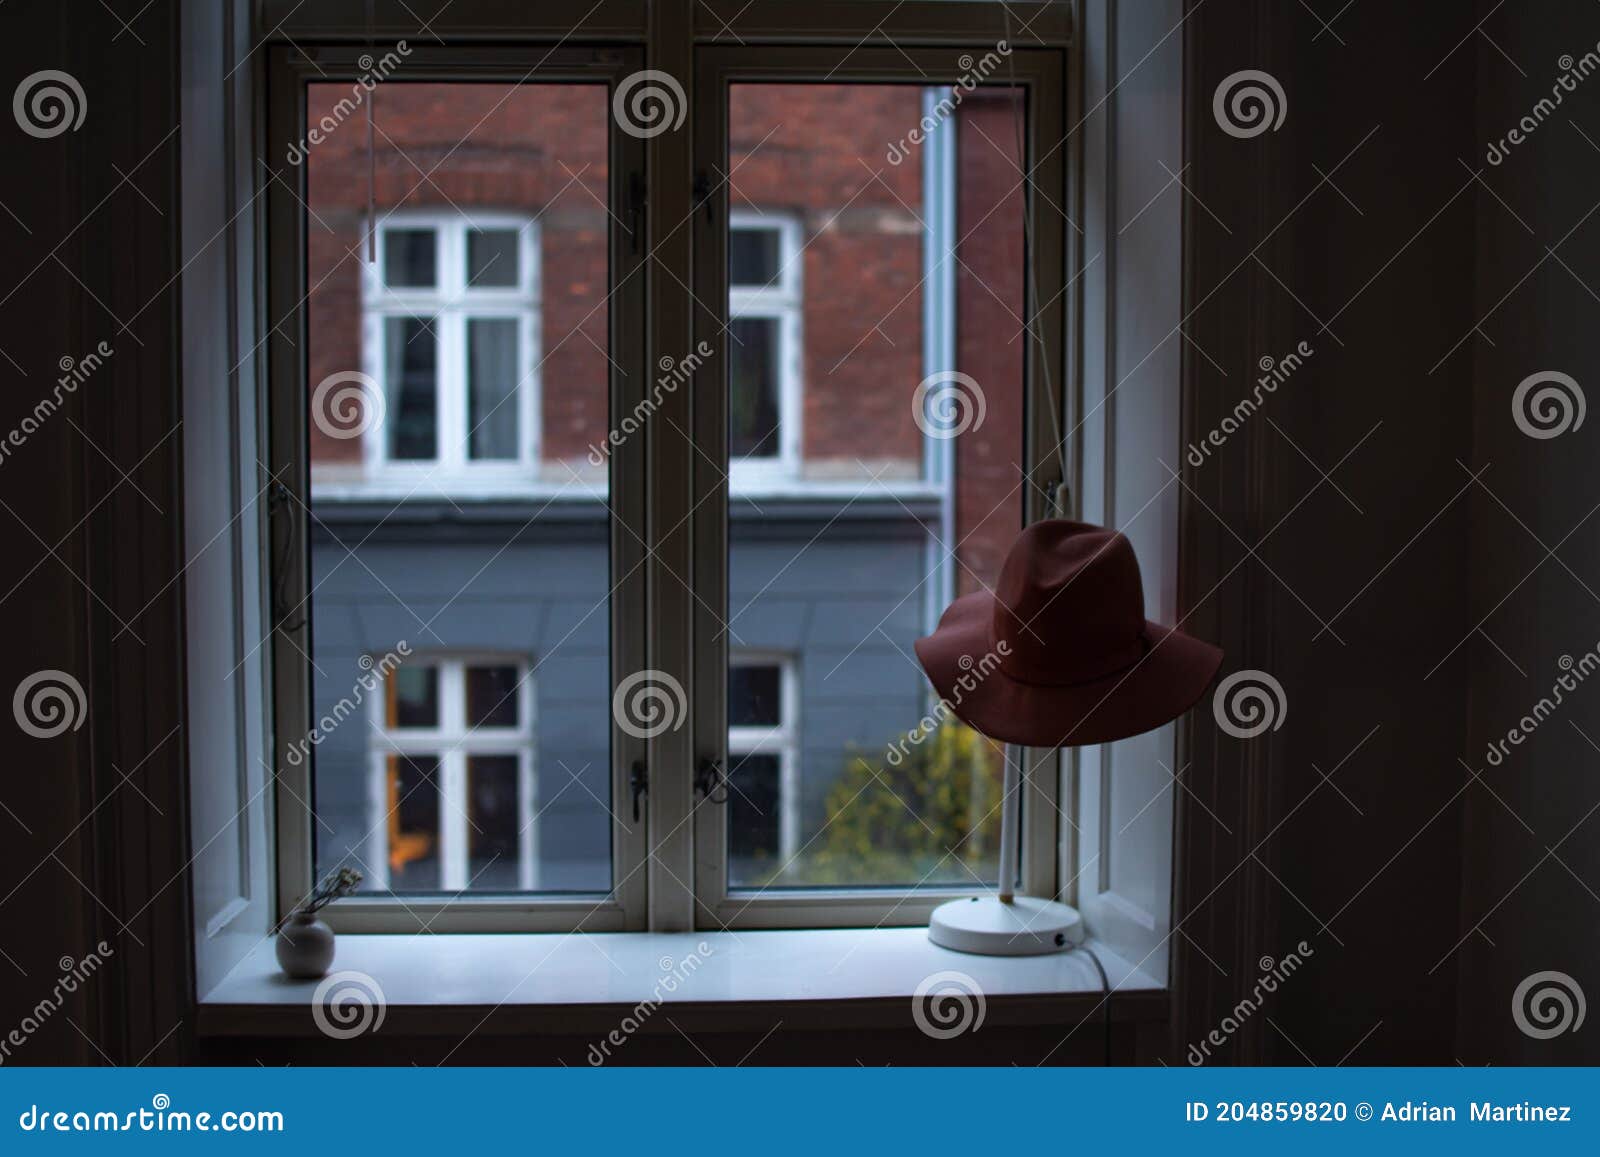 window from interior of the house, copenhague, denmark, march 2019